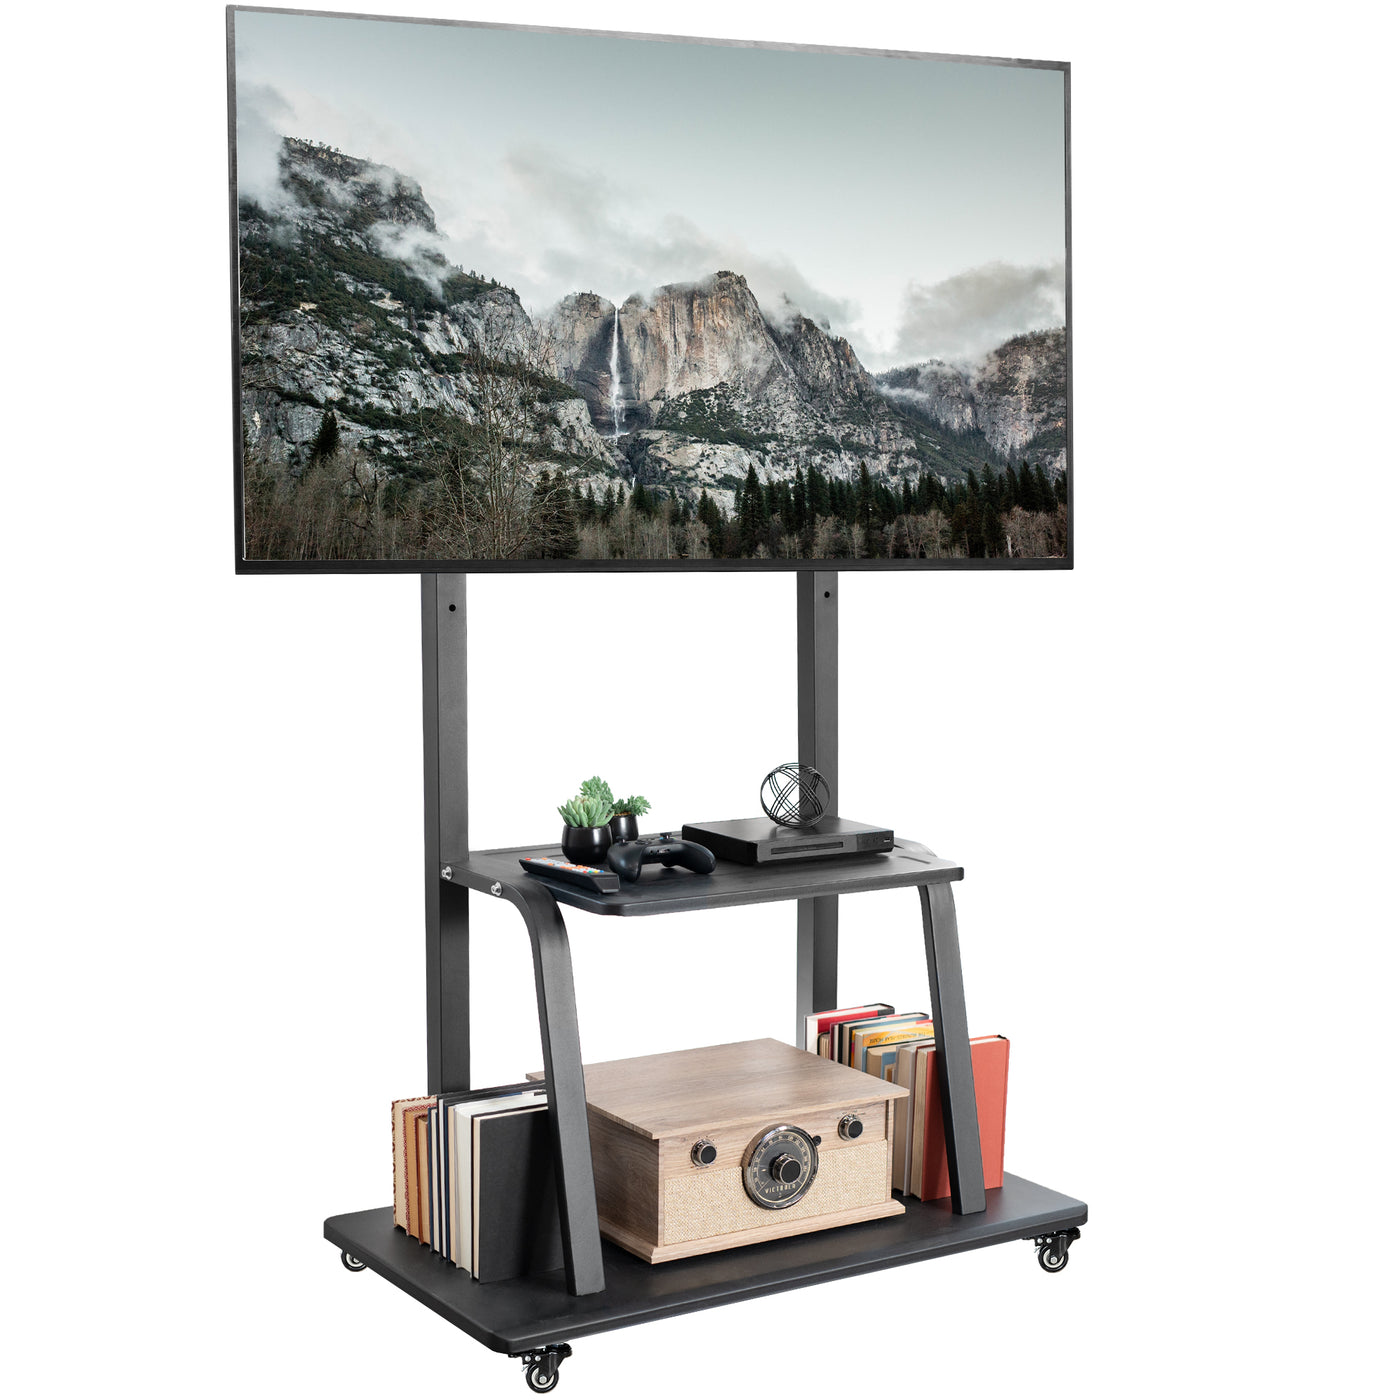 Large mobile TV stand with a shelf from VIVO.